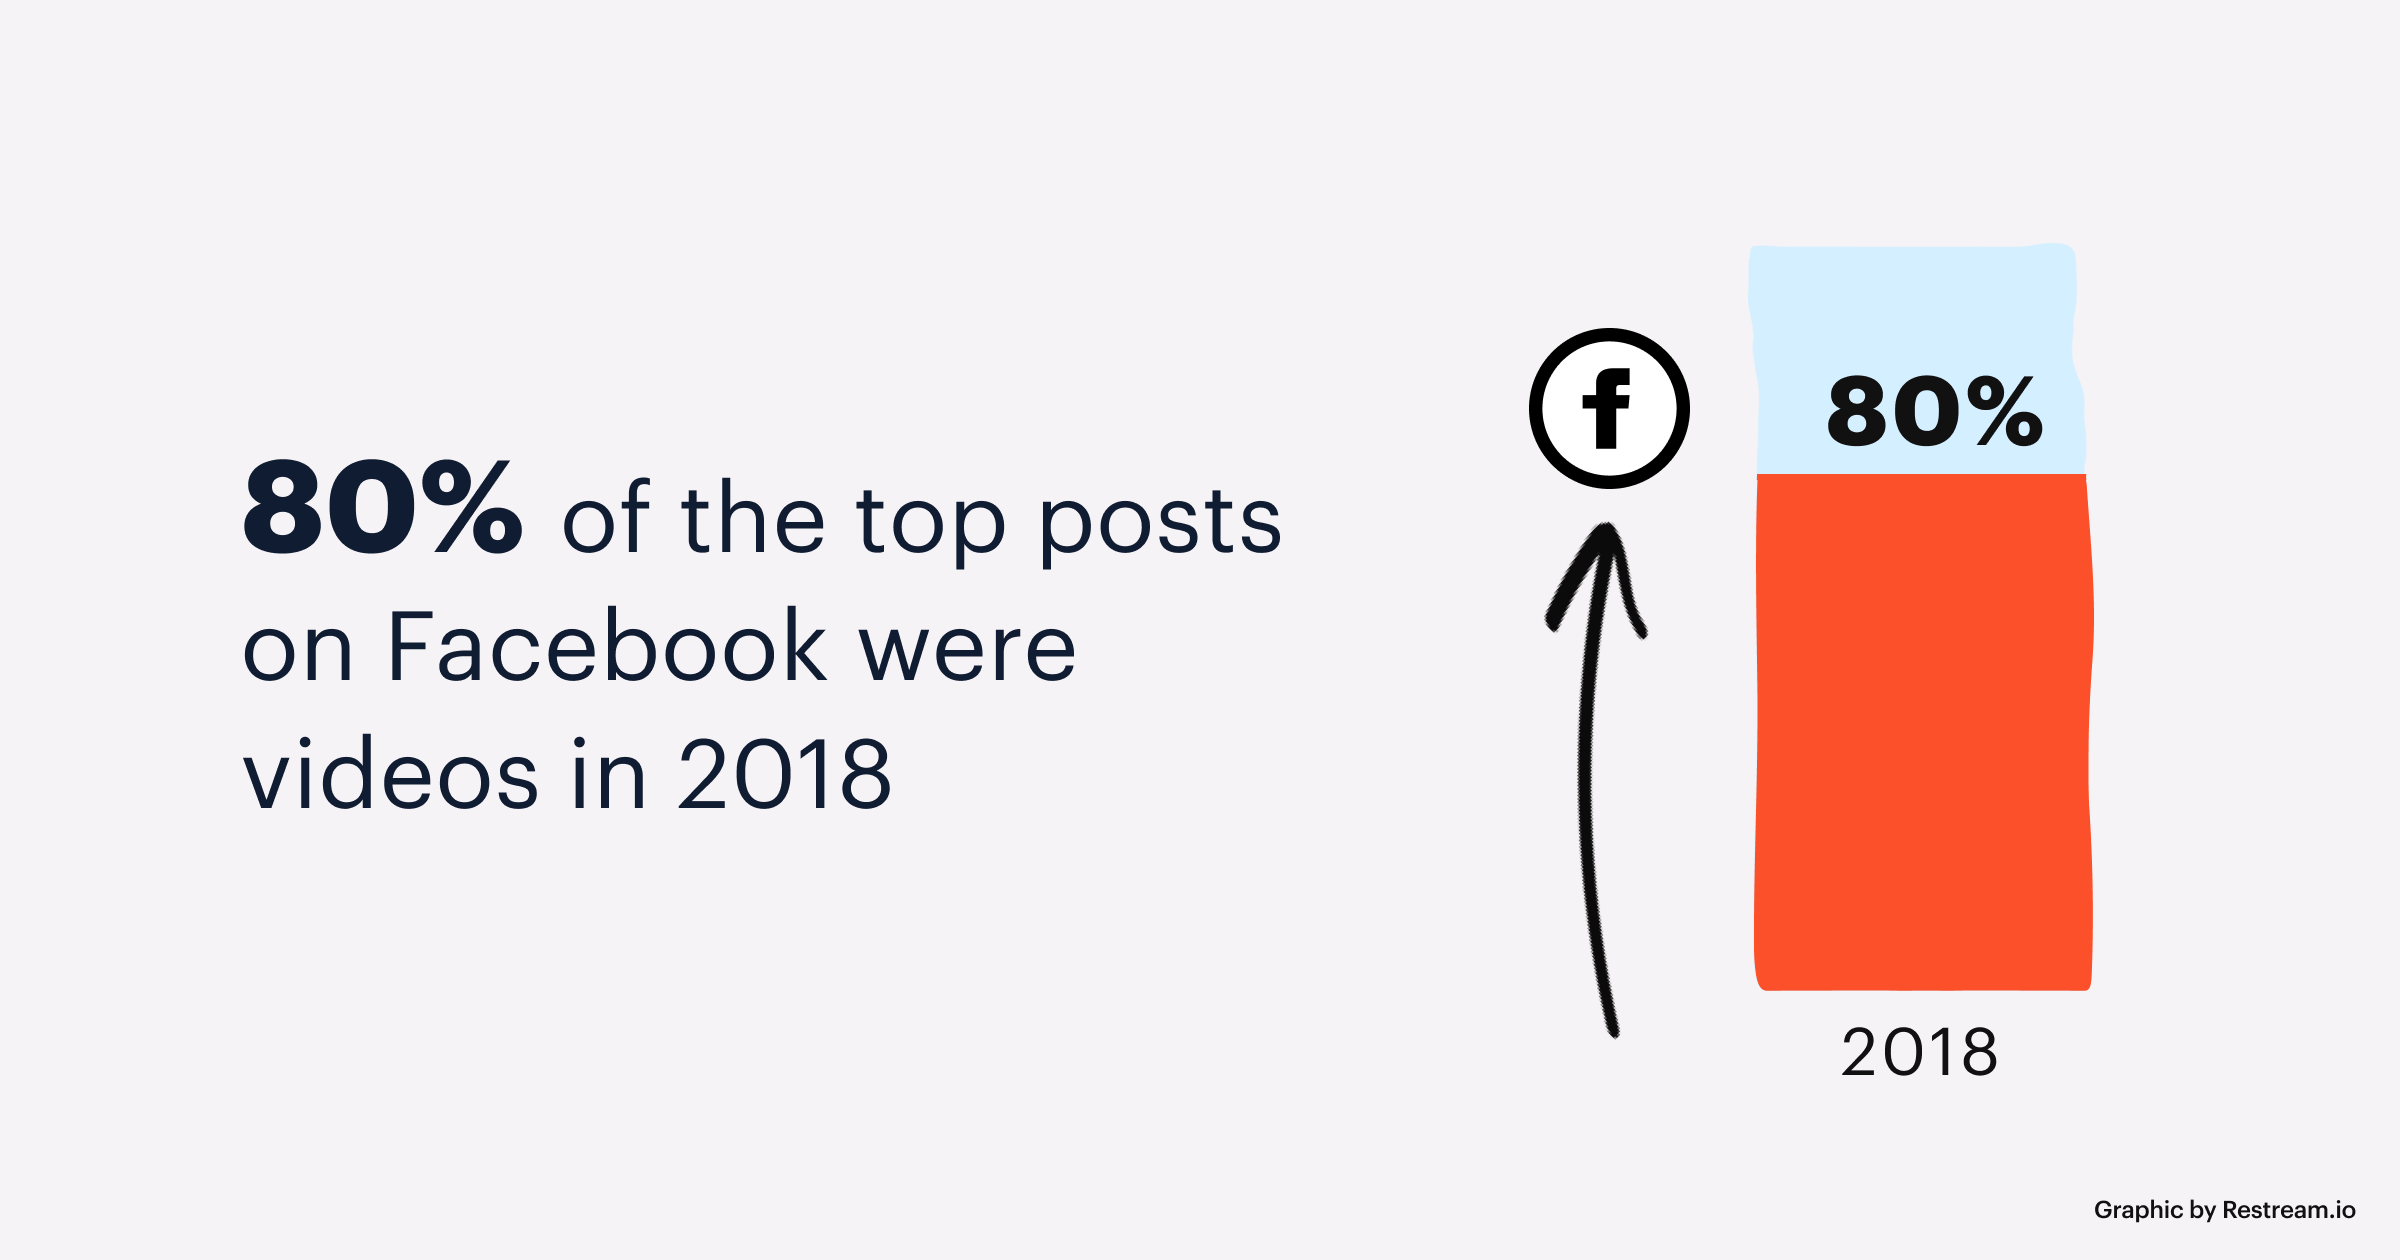 80% of the top 500 posts of Facebook in 2018 were video posts